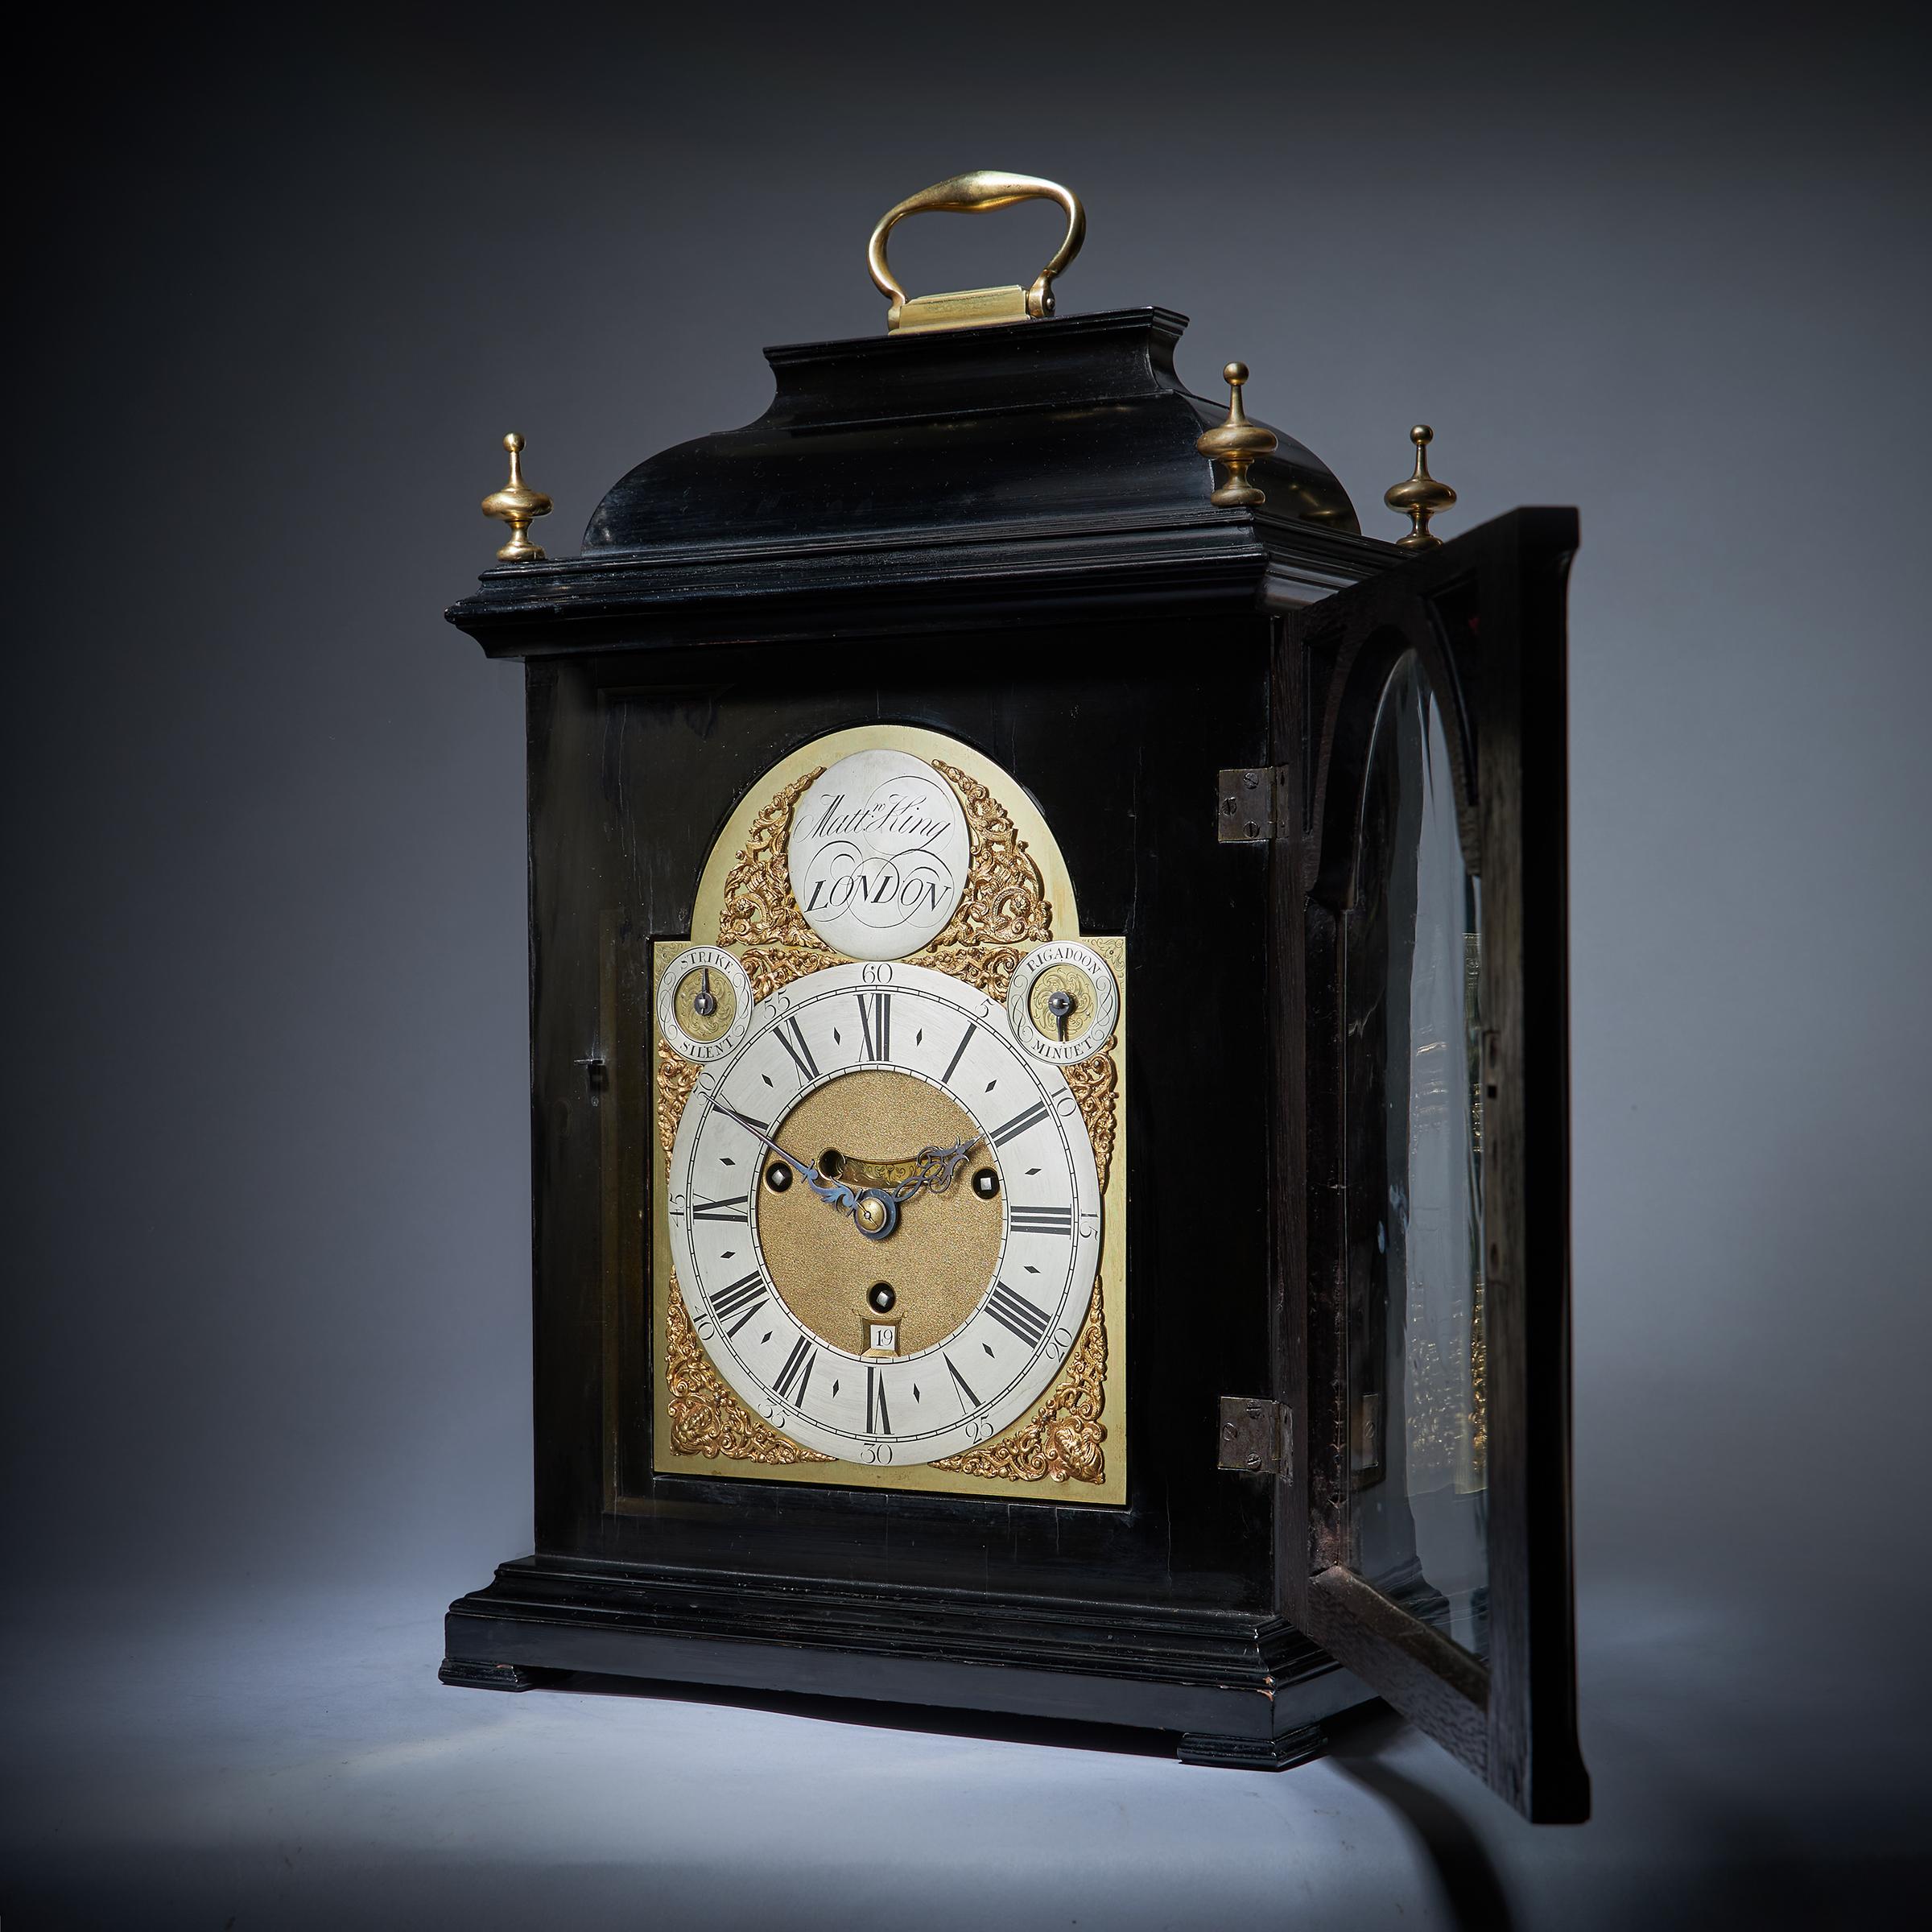 A Rare 18th Century George II Musical Table Clock by Matthew King, c. 1735. 2